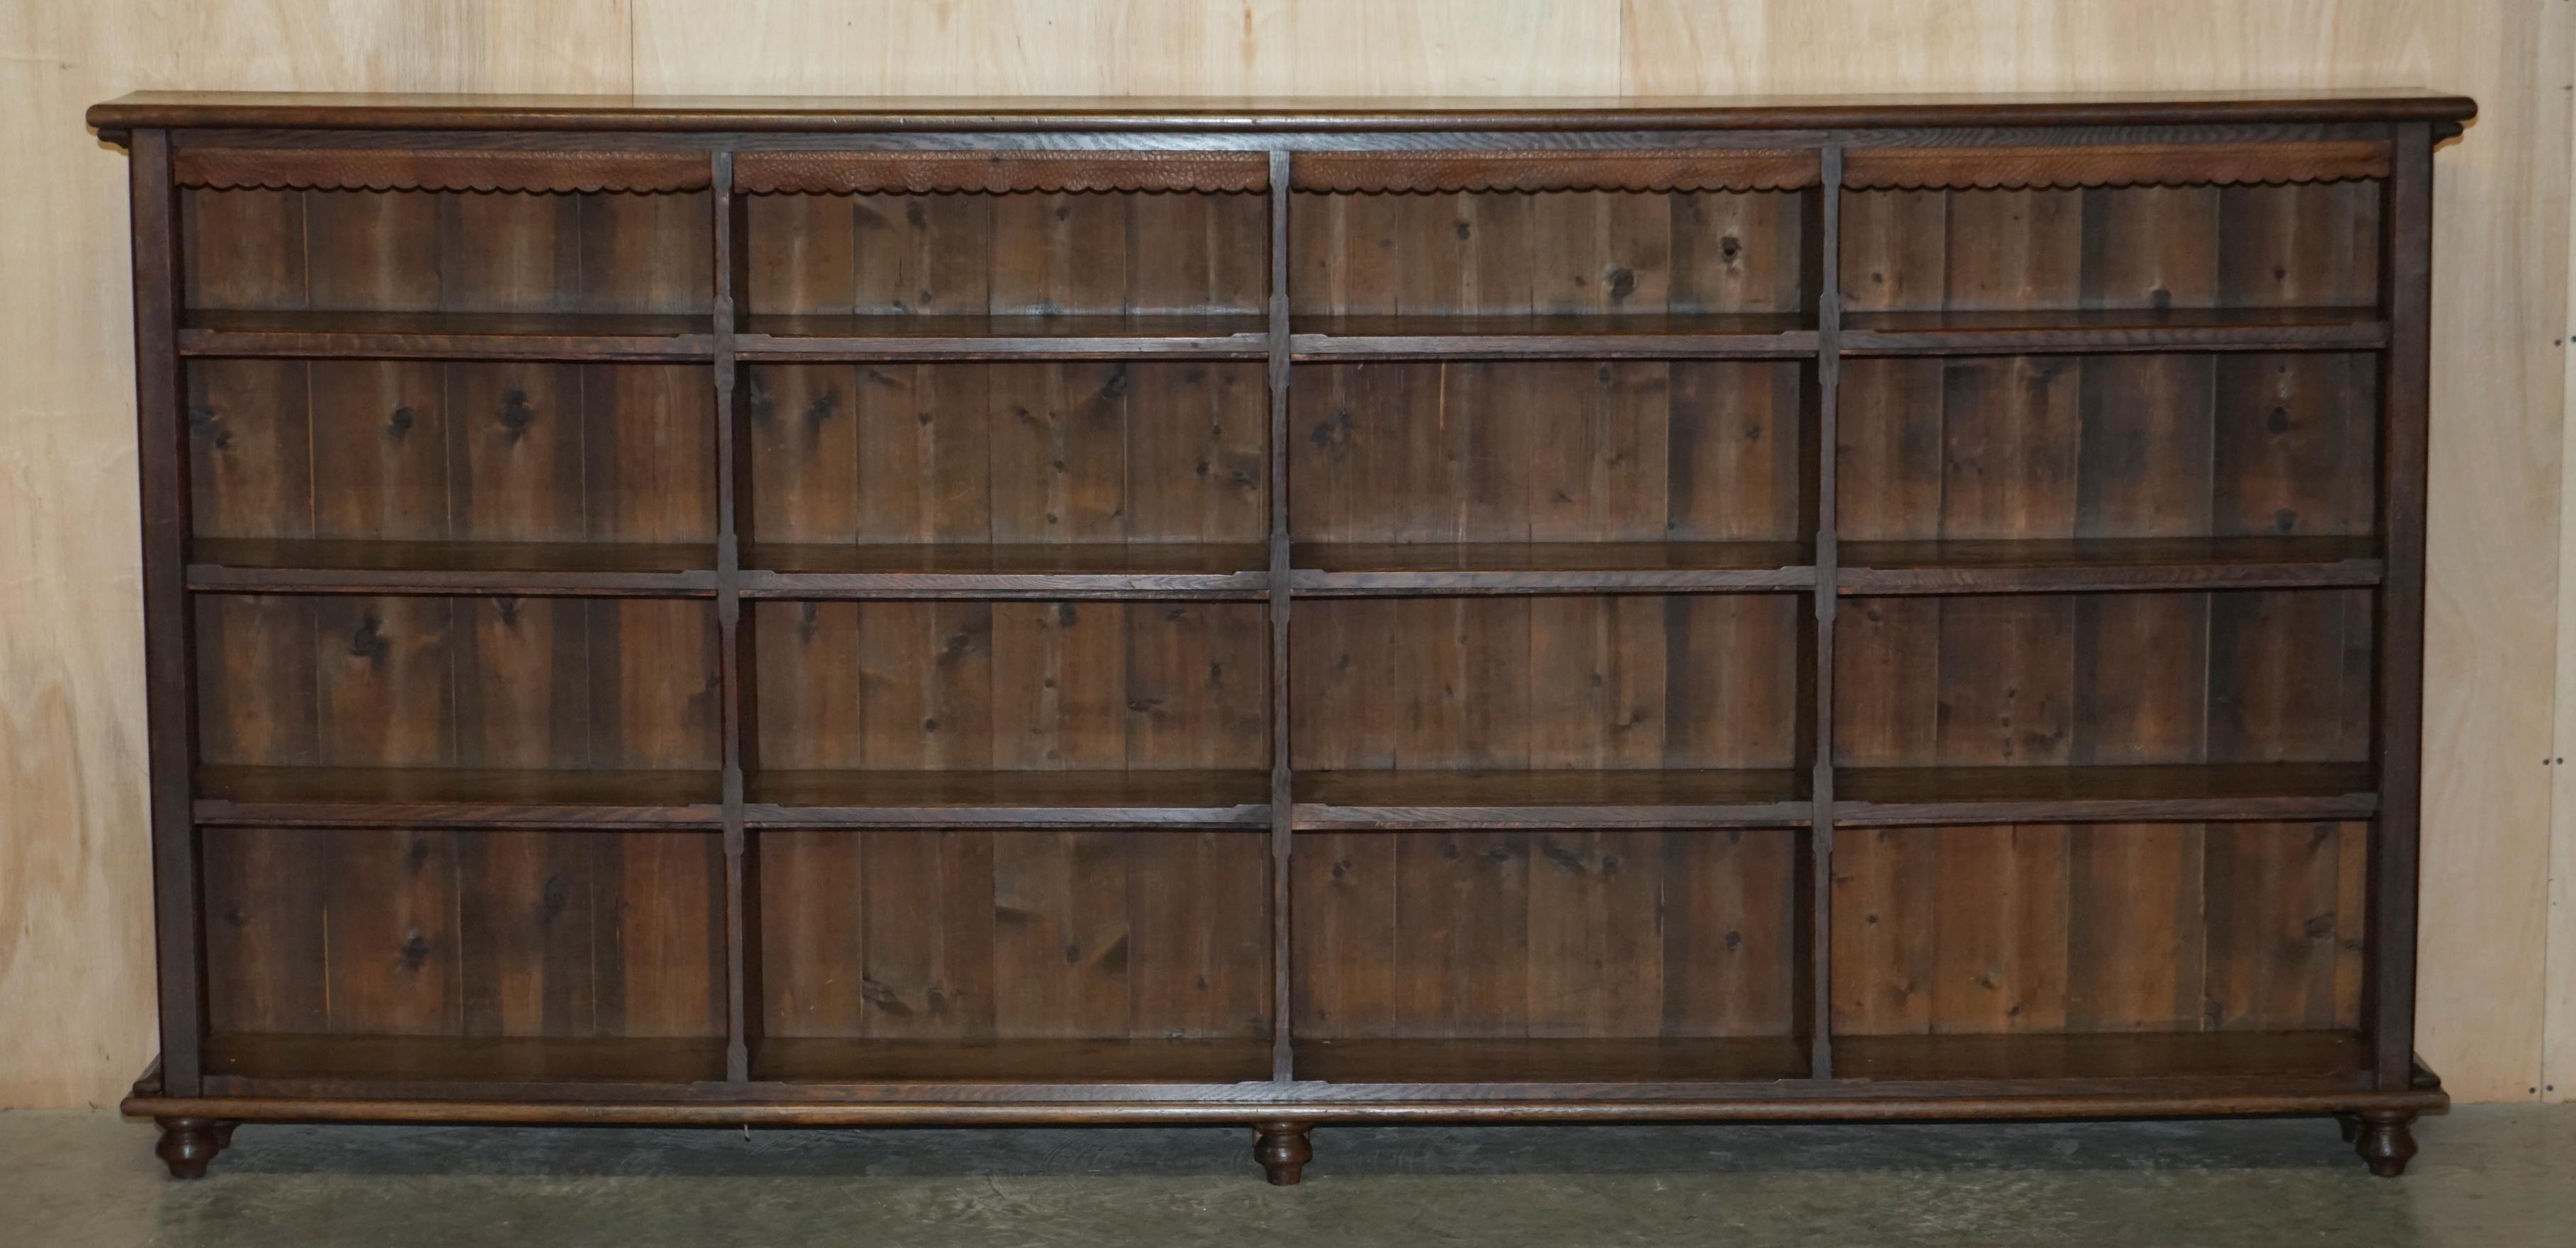 We are delighted to offer for sale this stunning original mid-Victorian open library bookcase or sideboard with height adjustable shelves 

This is a very good looking and well made piece. It is a good height and wonderful width, ideally suited